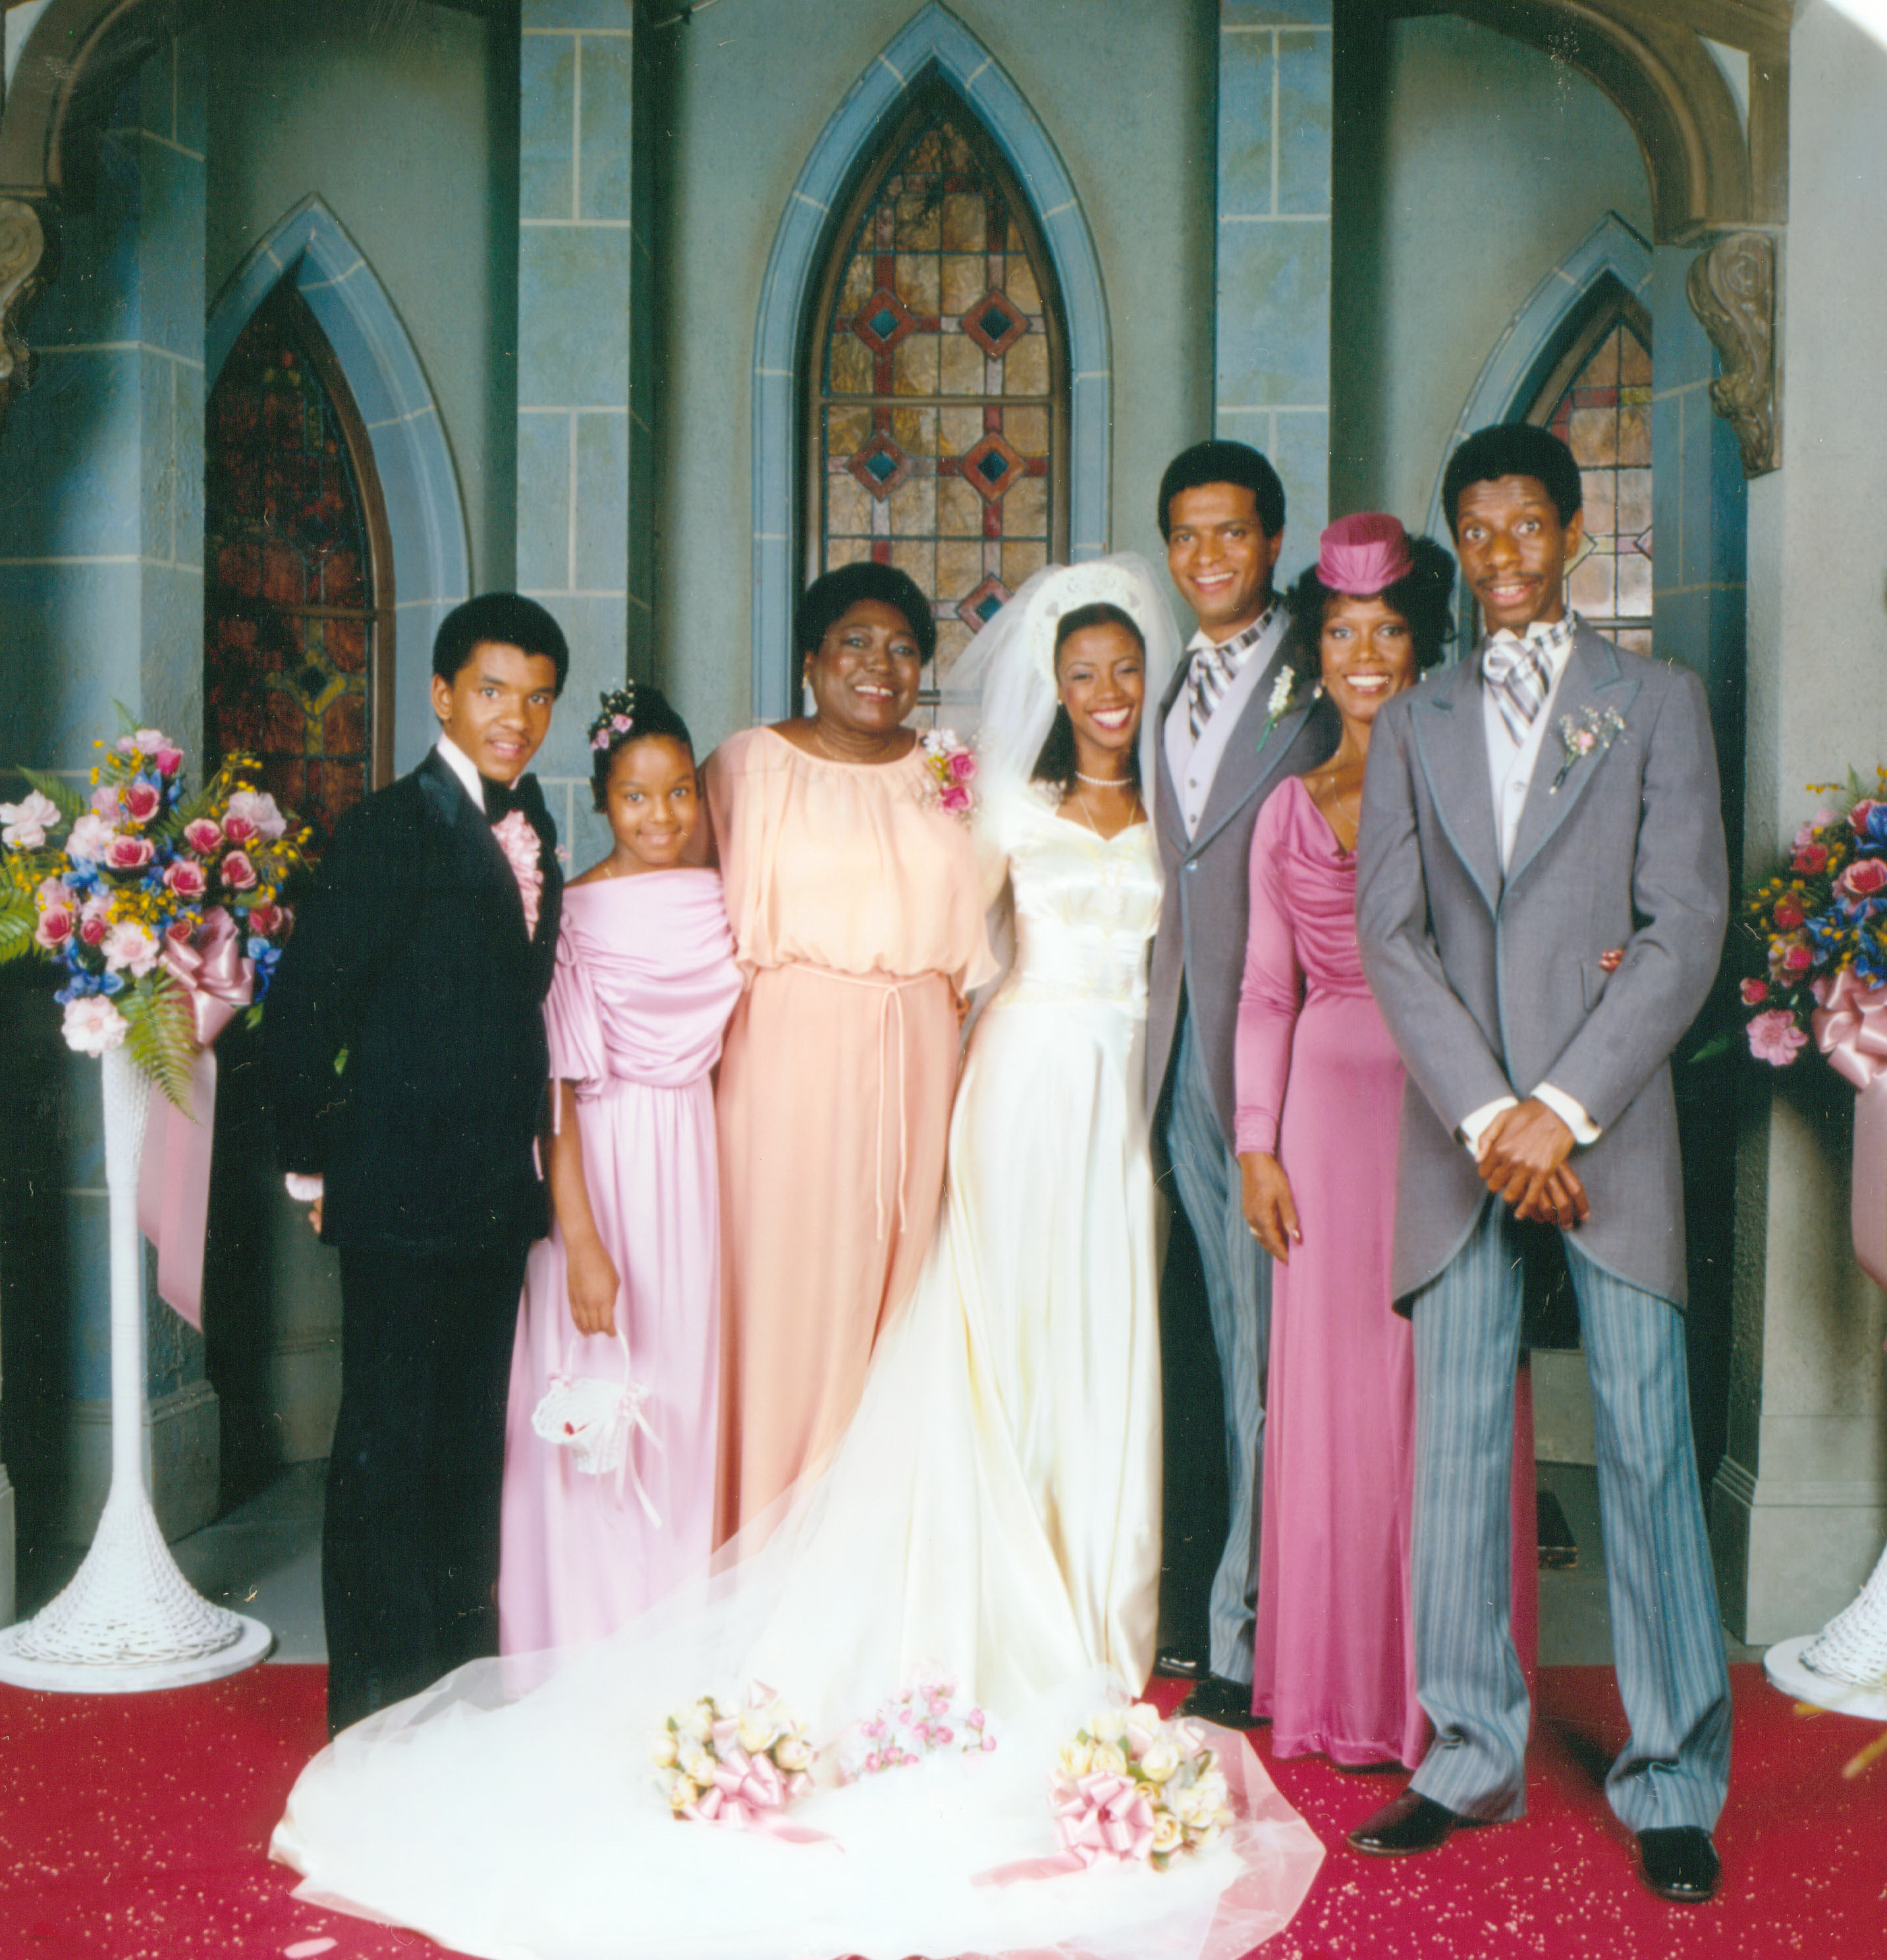 Cast of the CBS television series "Good Times" pose for a group portrait on the "Thelma's Wedding" episode in Los Angeles, on August 3, 1978. (CBS Photo Archive—Getty Images)